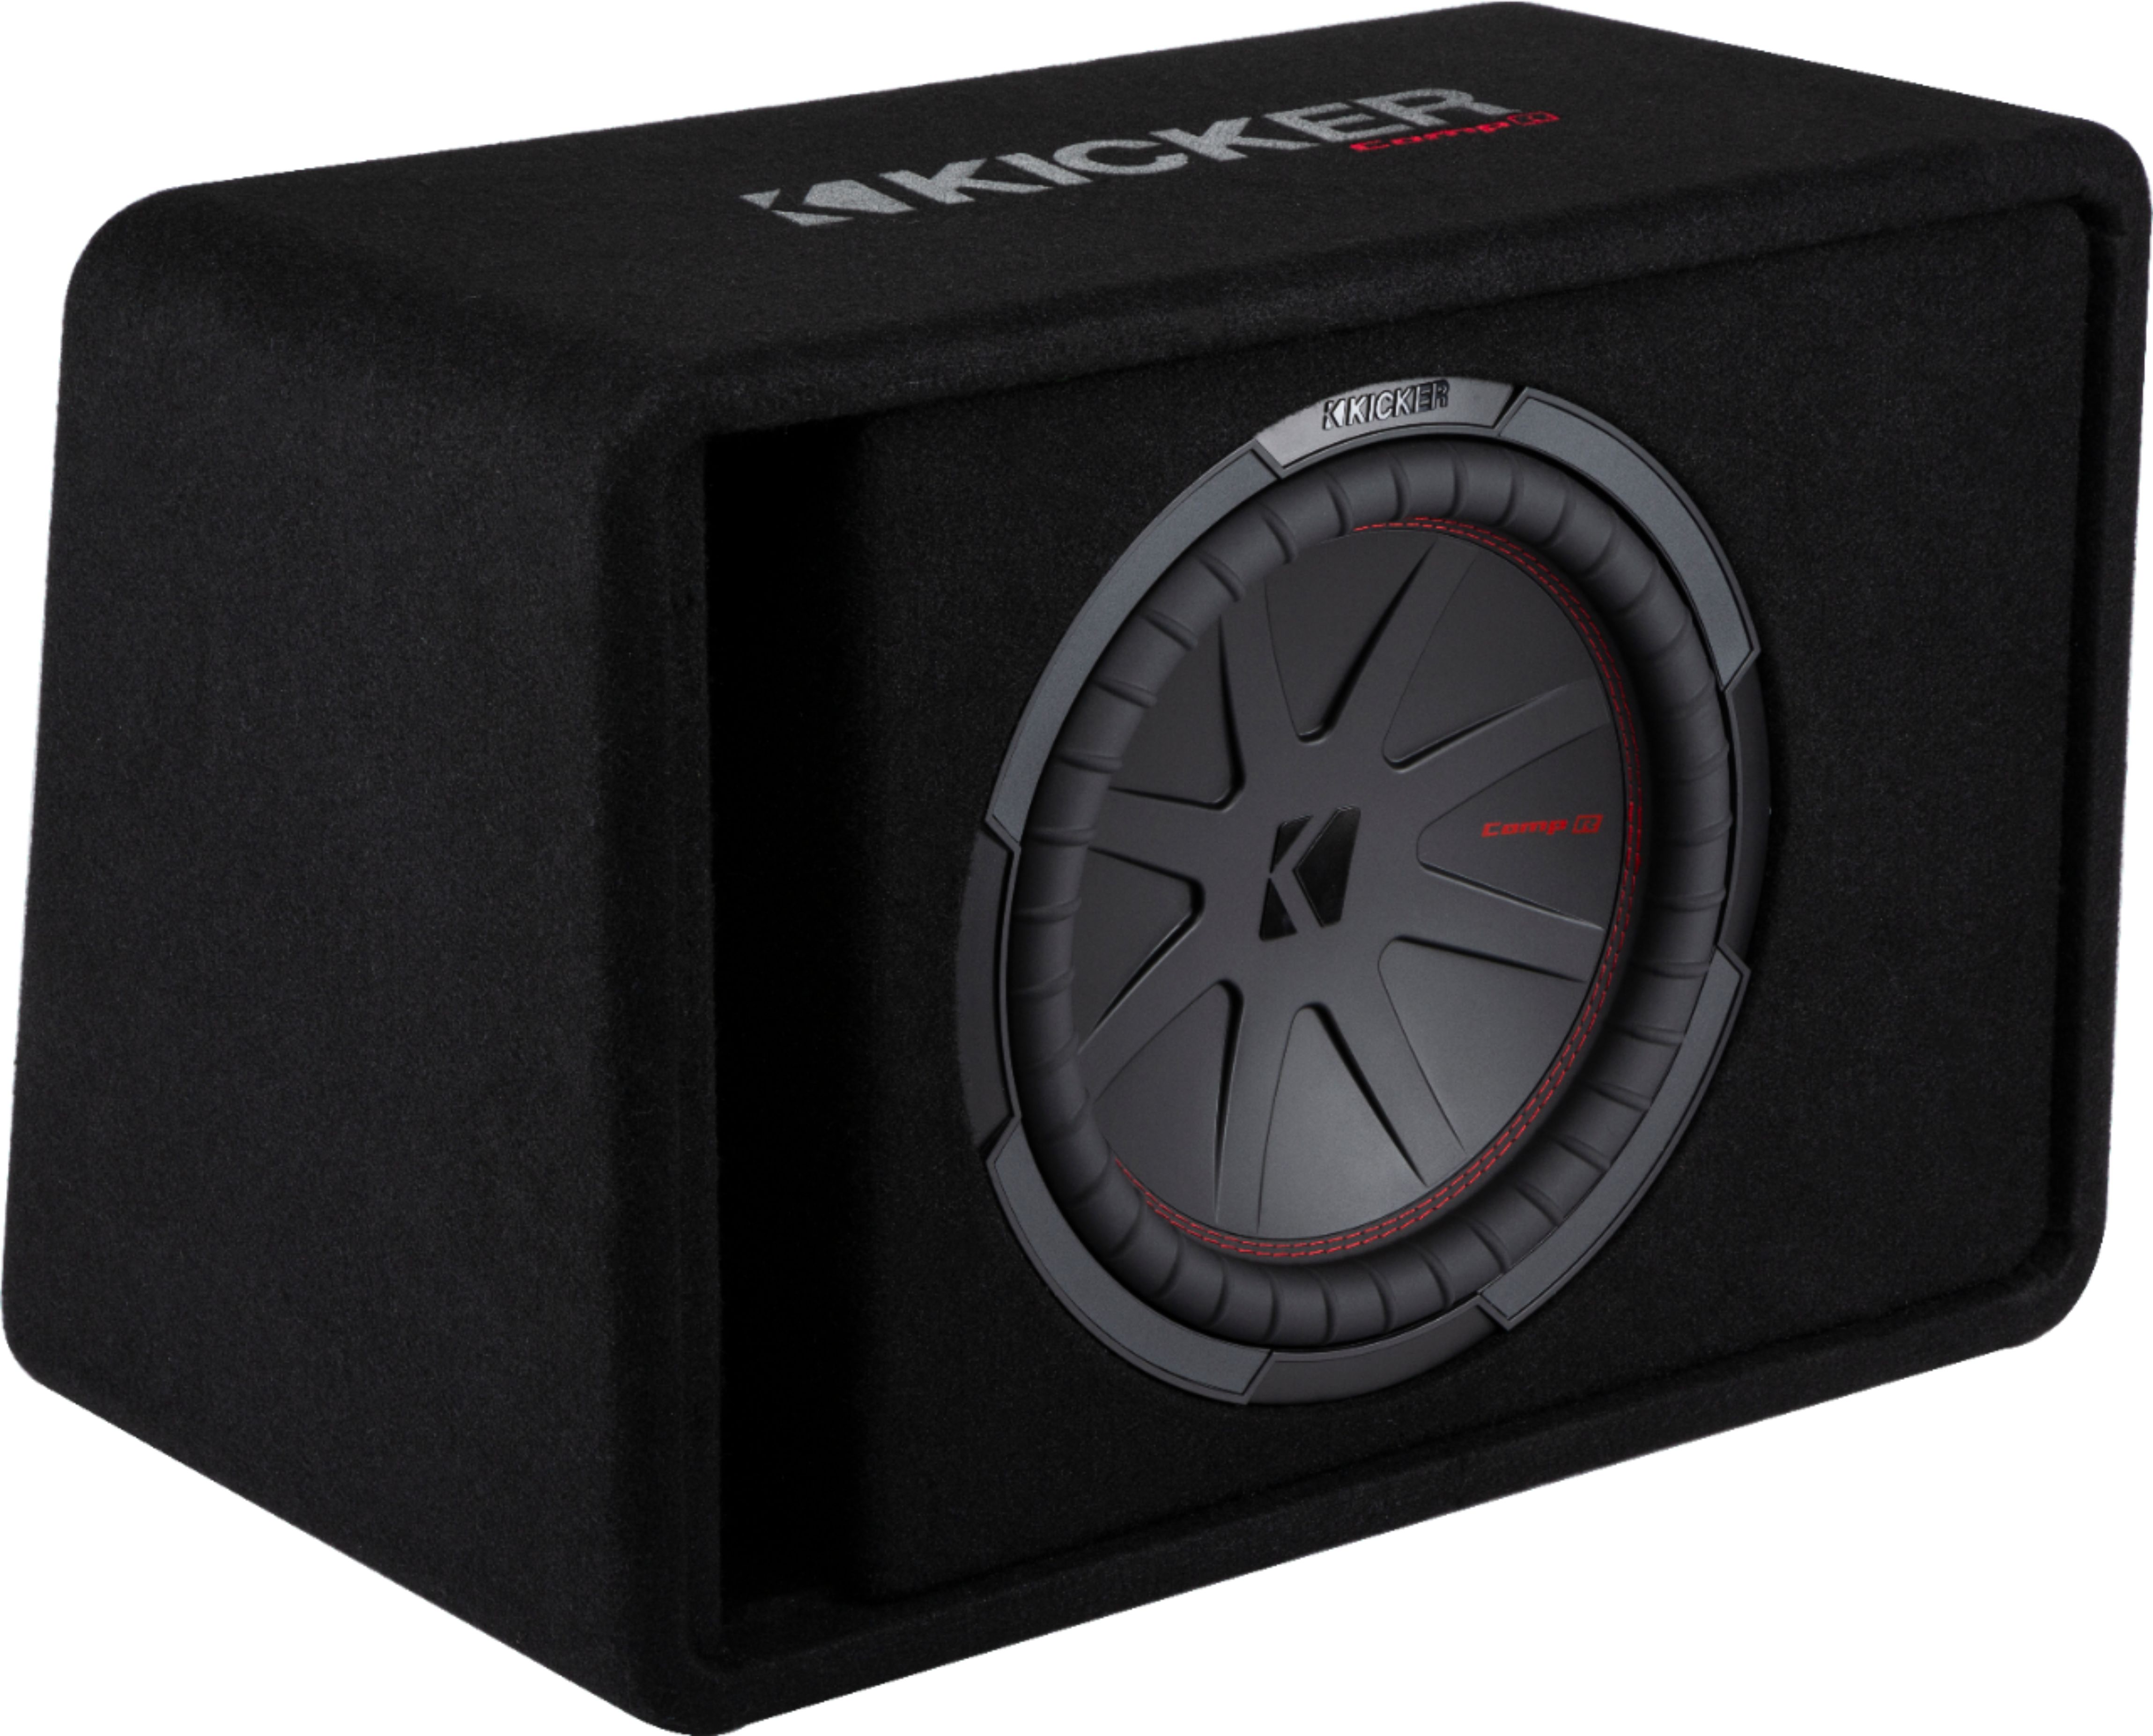 Angle View: KICKER - TB 8" Single-Voice-Coil 2-Ohm Loaded Subwoofer Enclosure - Black